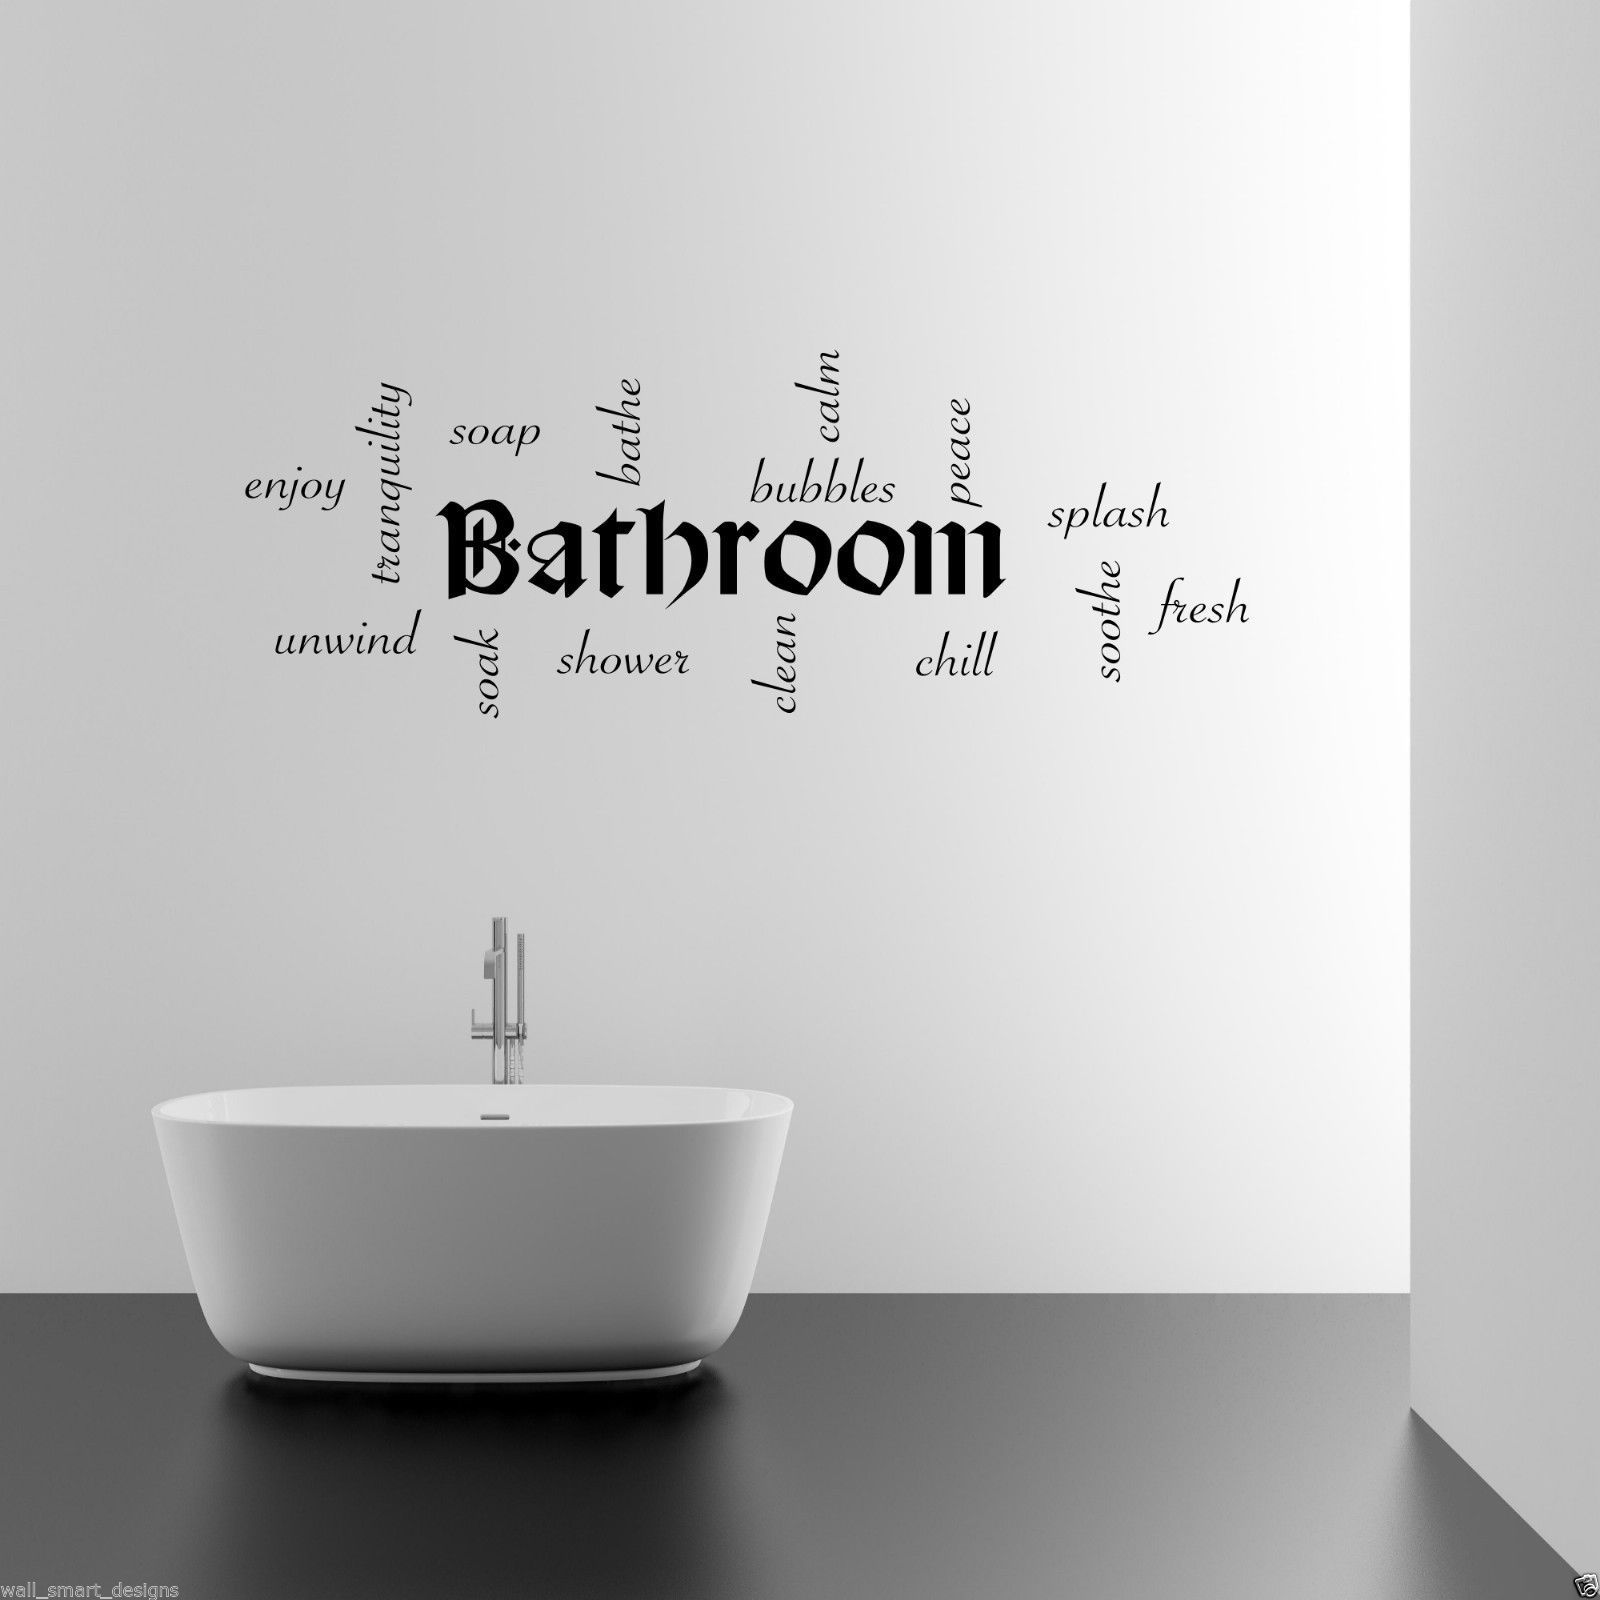 Bathroom Relax Unwind Refresh Wall Art Sticker Lounge Quote Decal Regarding Relax Wall Art (View 19 of 20)